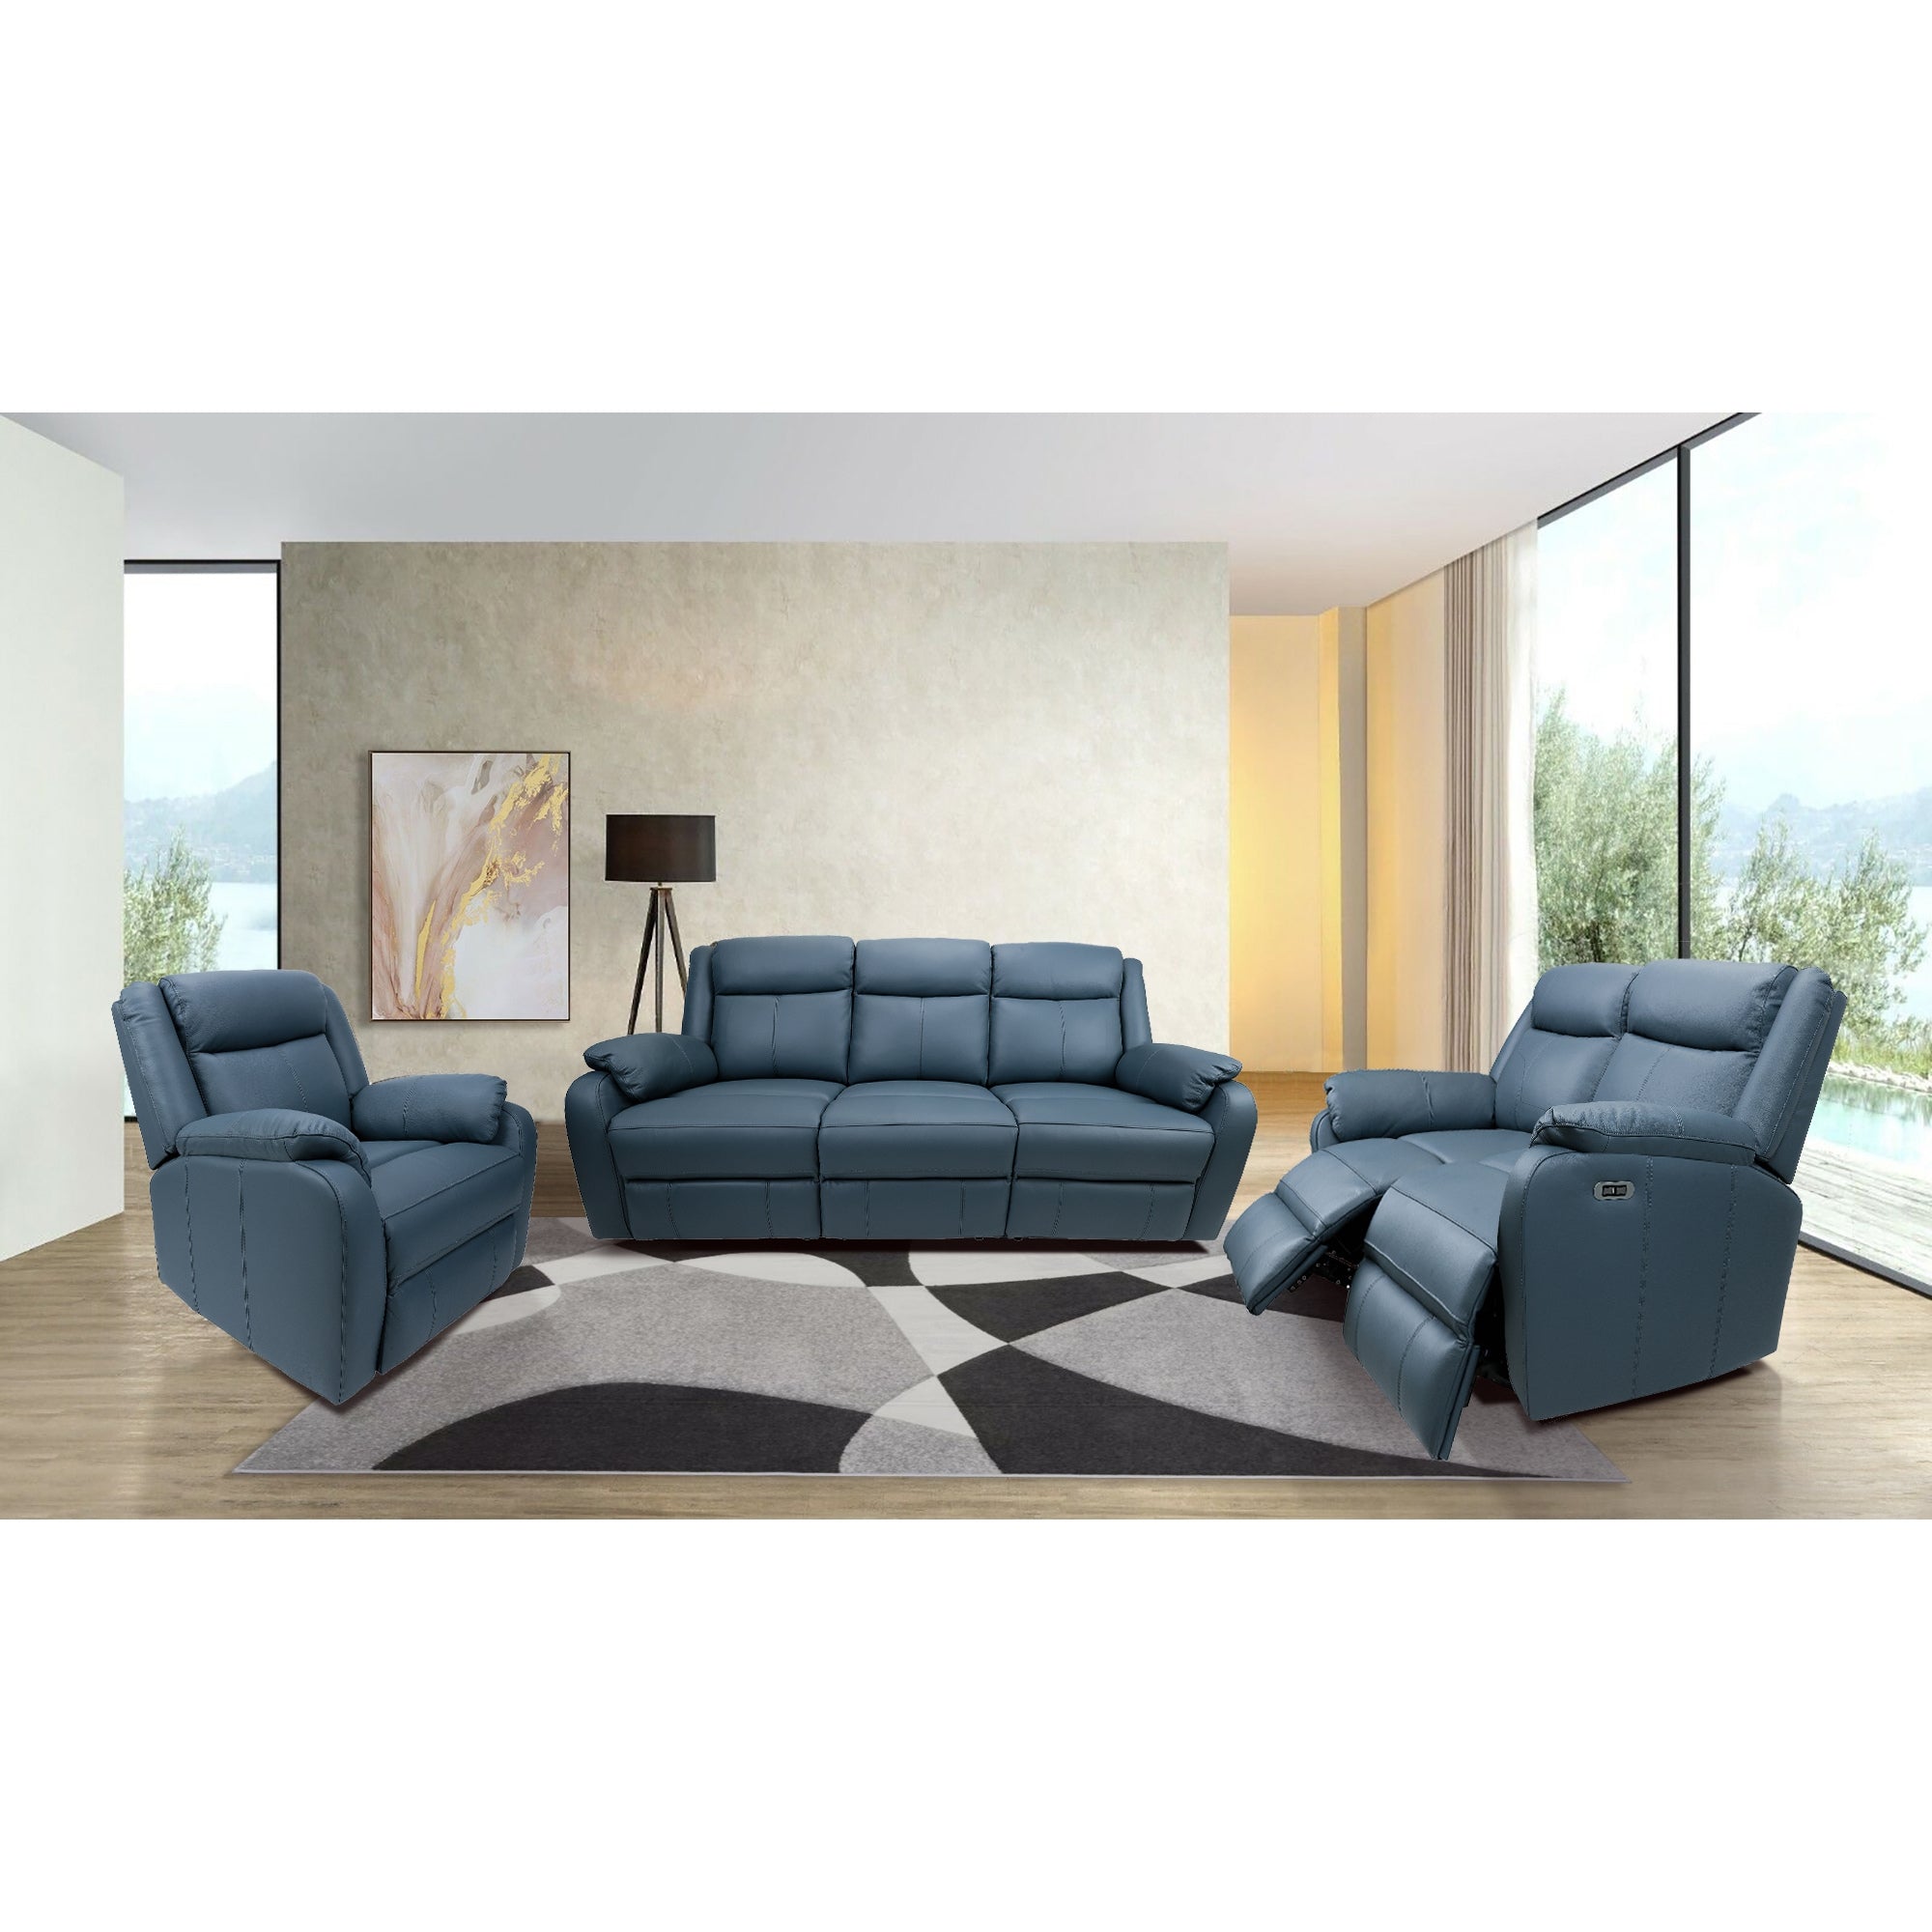 Bella 3 Seater Electric Recliner Genuine Leather Upholstered Lounge - Blue